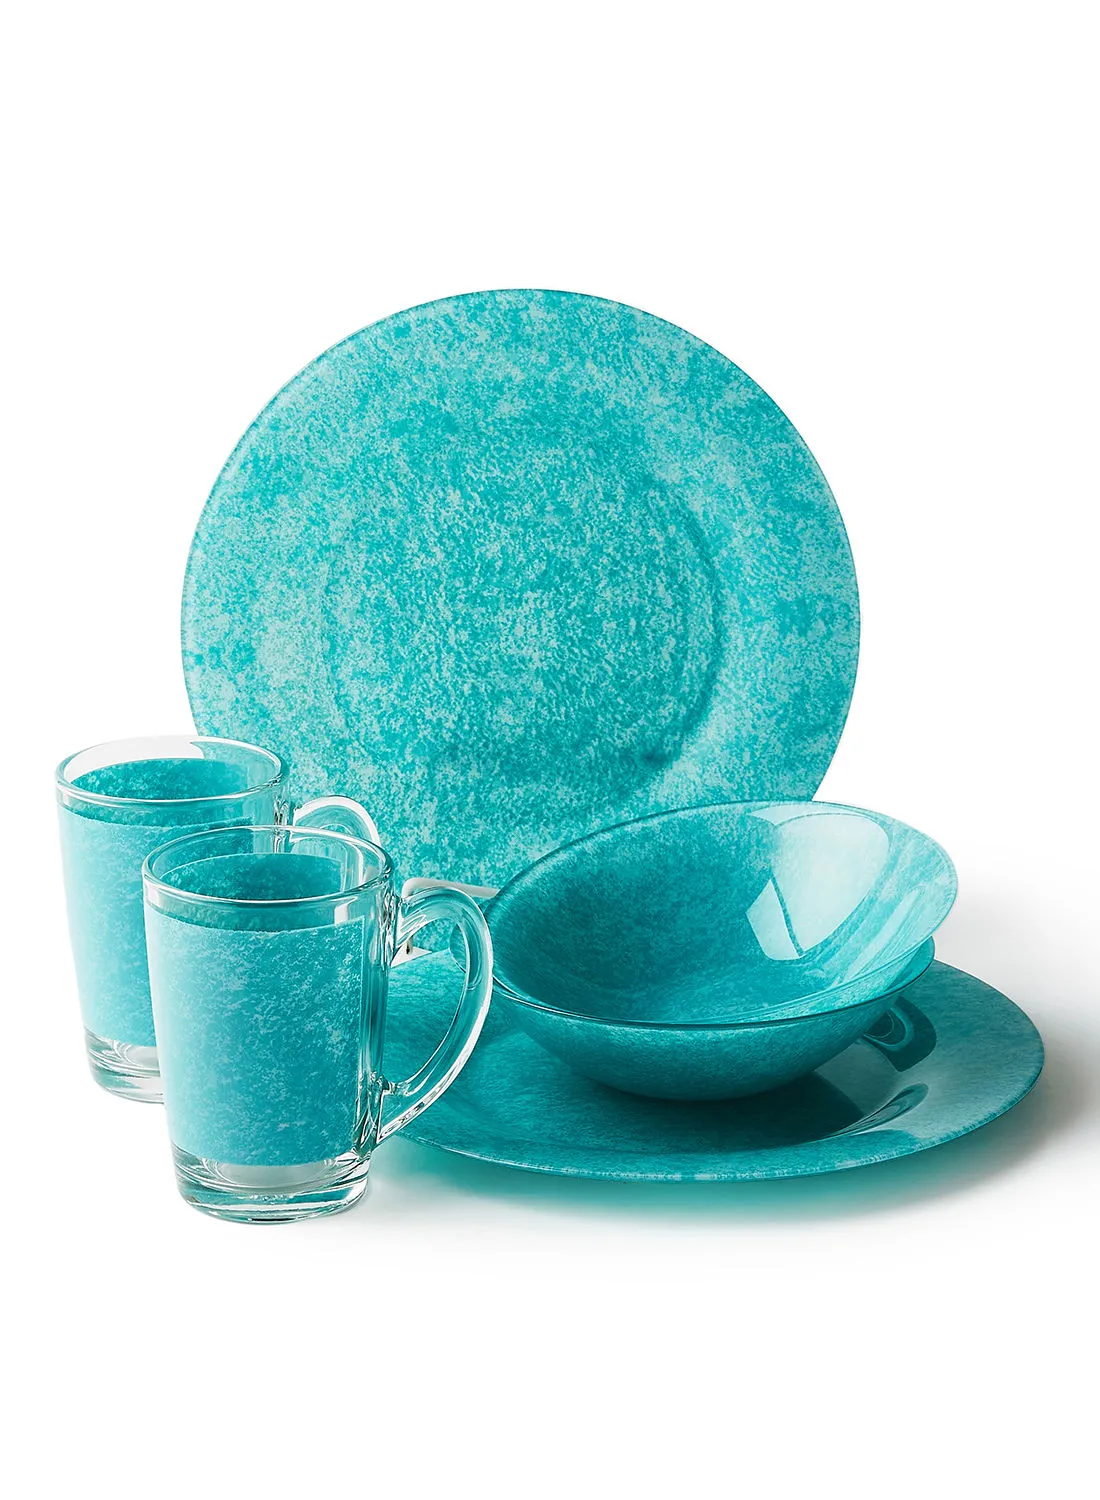 noon east 6 Piece Glass Dinner Set For Everyday Use - Light Weight Dishes, Plates - Dinner Plate, Bowl - Serves 2 - Blue